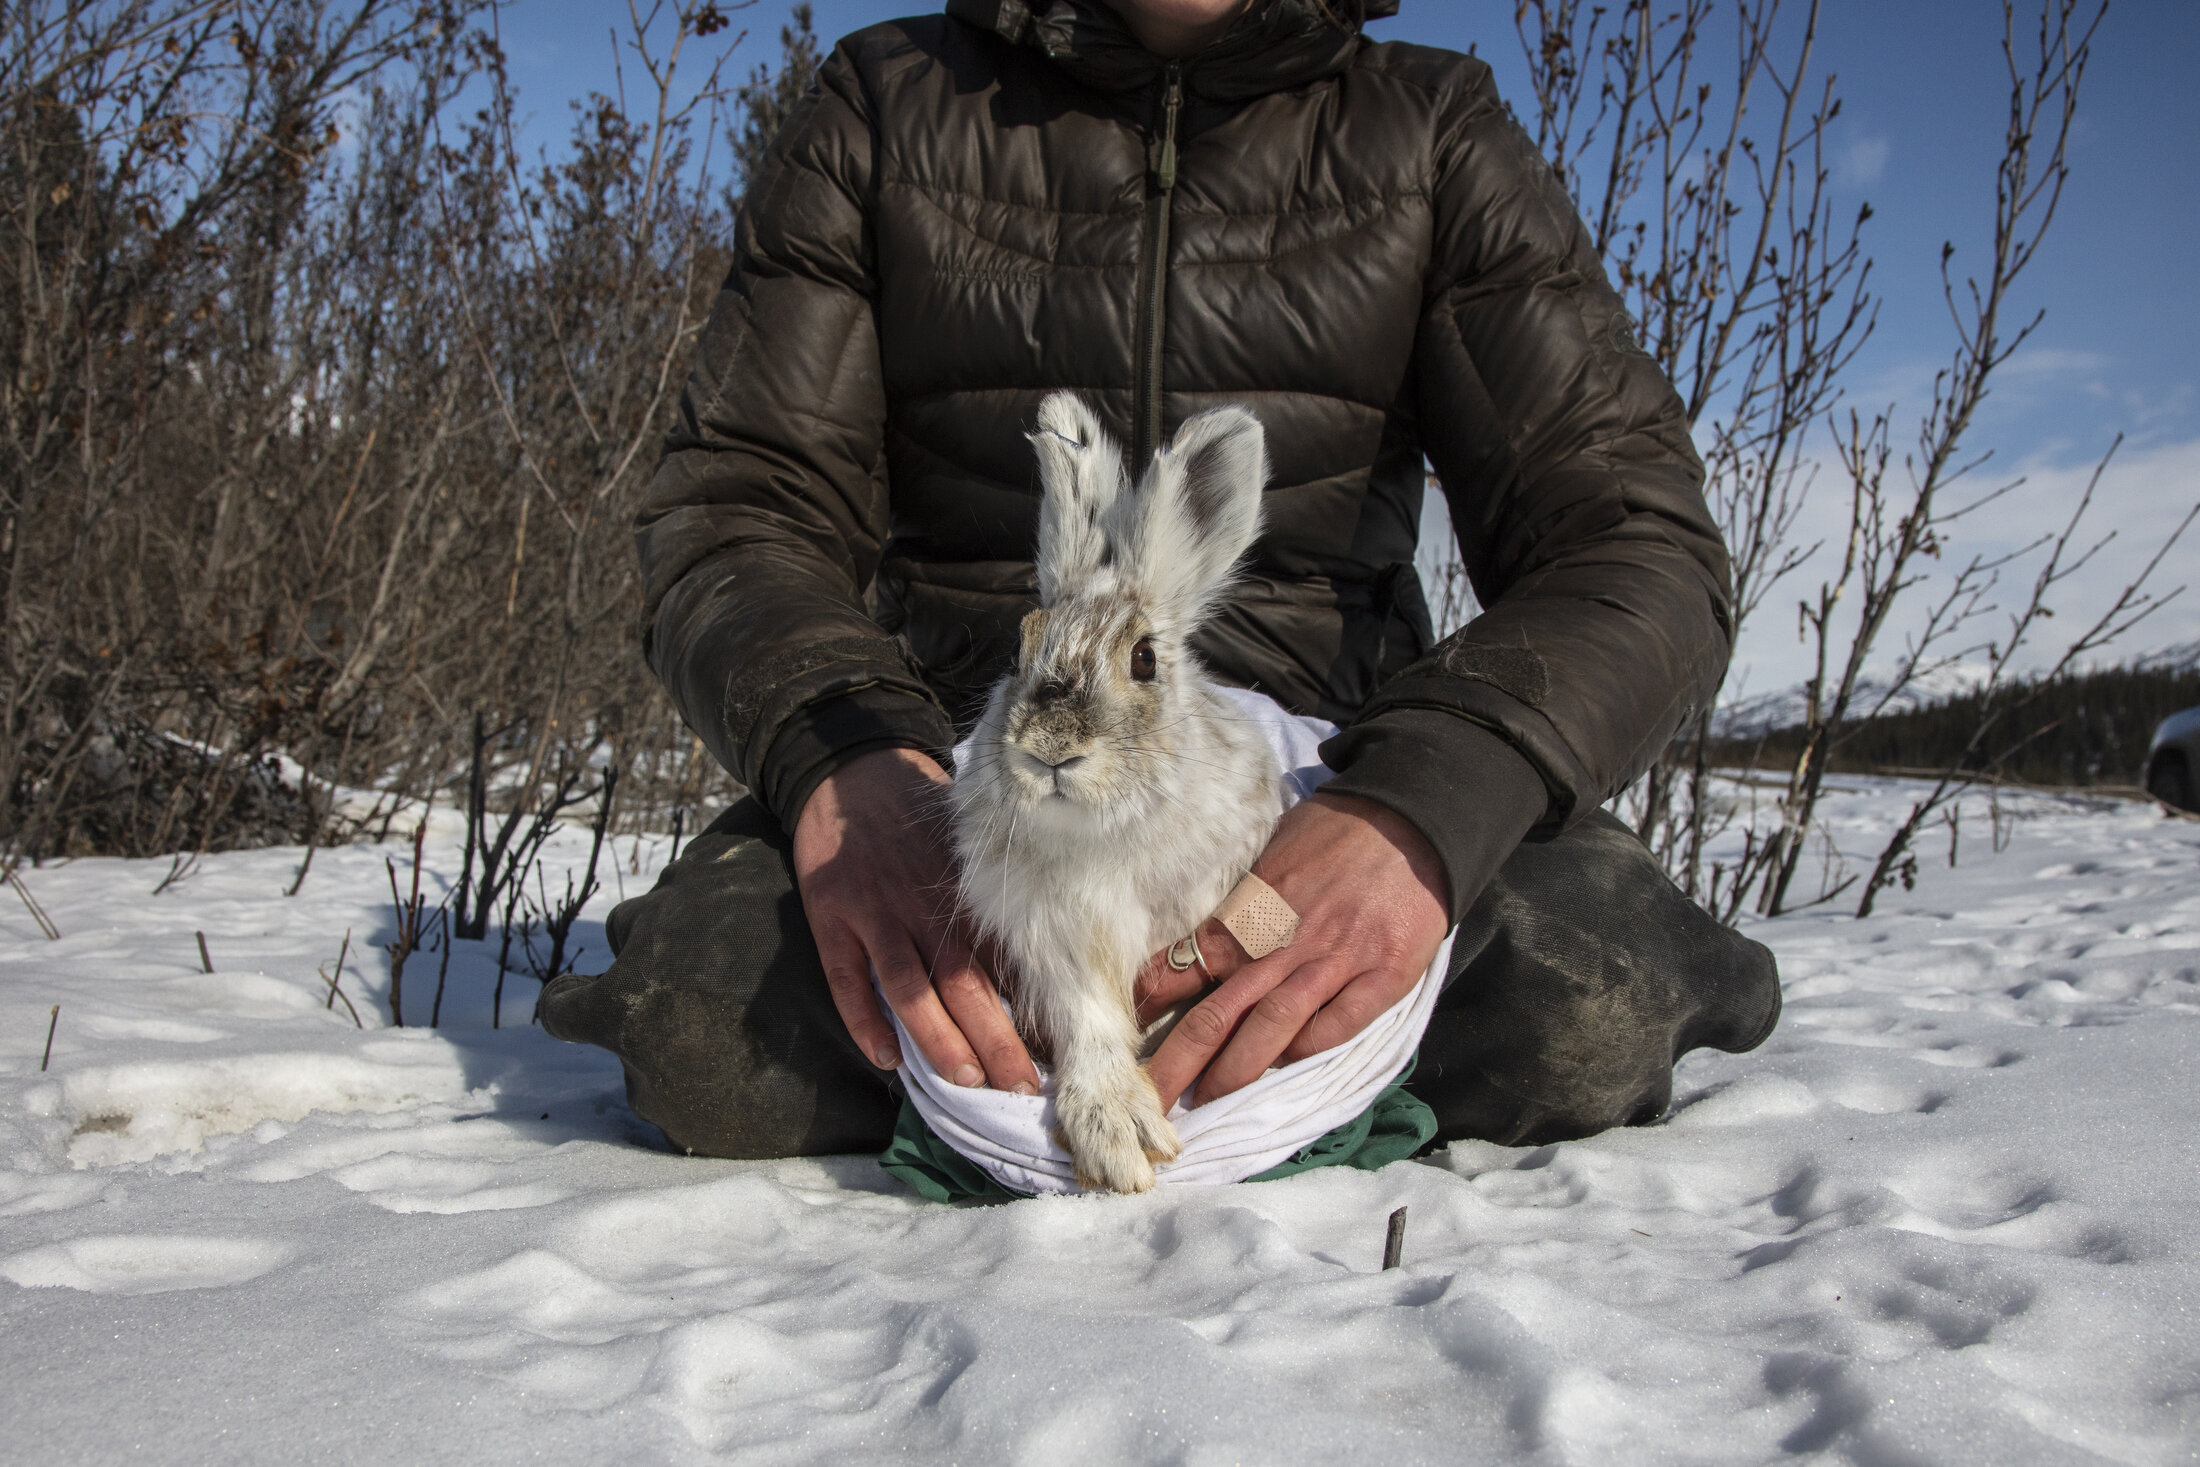  Scientist Claire Montgomerie from University of Alaska Fairbanks at a snowshoe hare research site along the Dalton Highway in Alaska on May 4, 2018. 